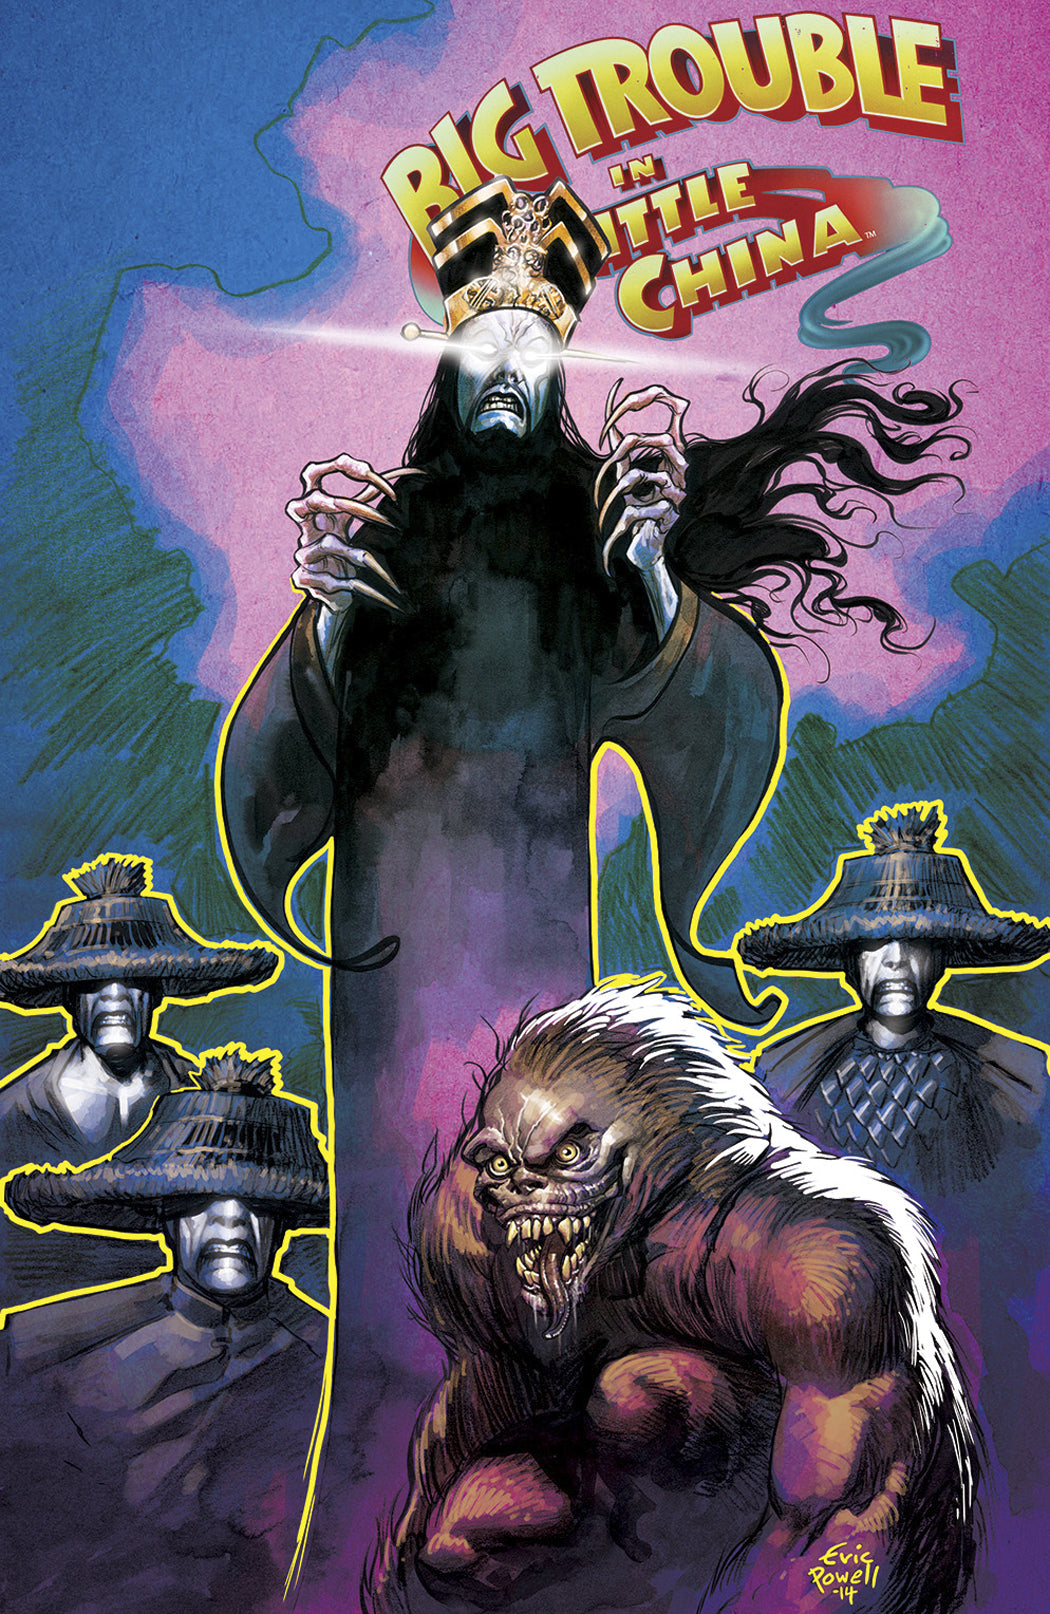 Big Trouble in Little China #5-A Eric Powell